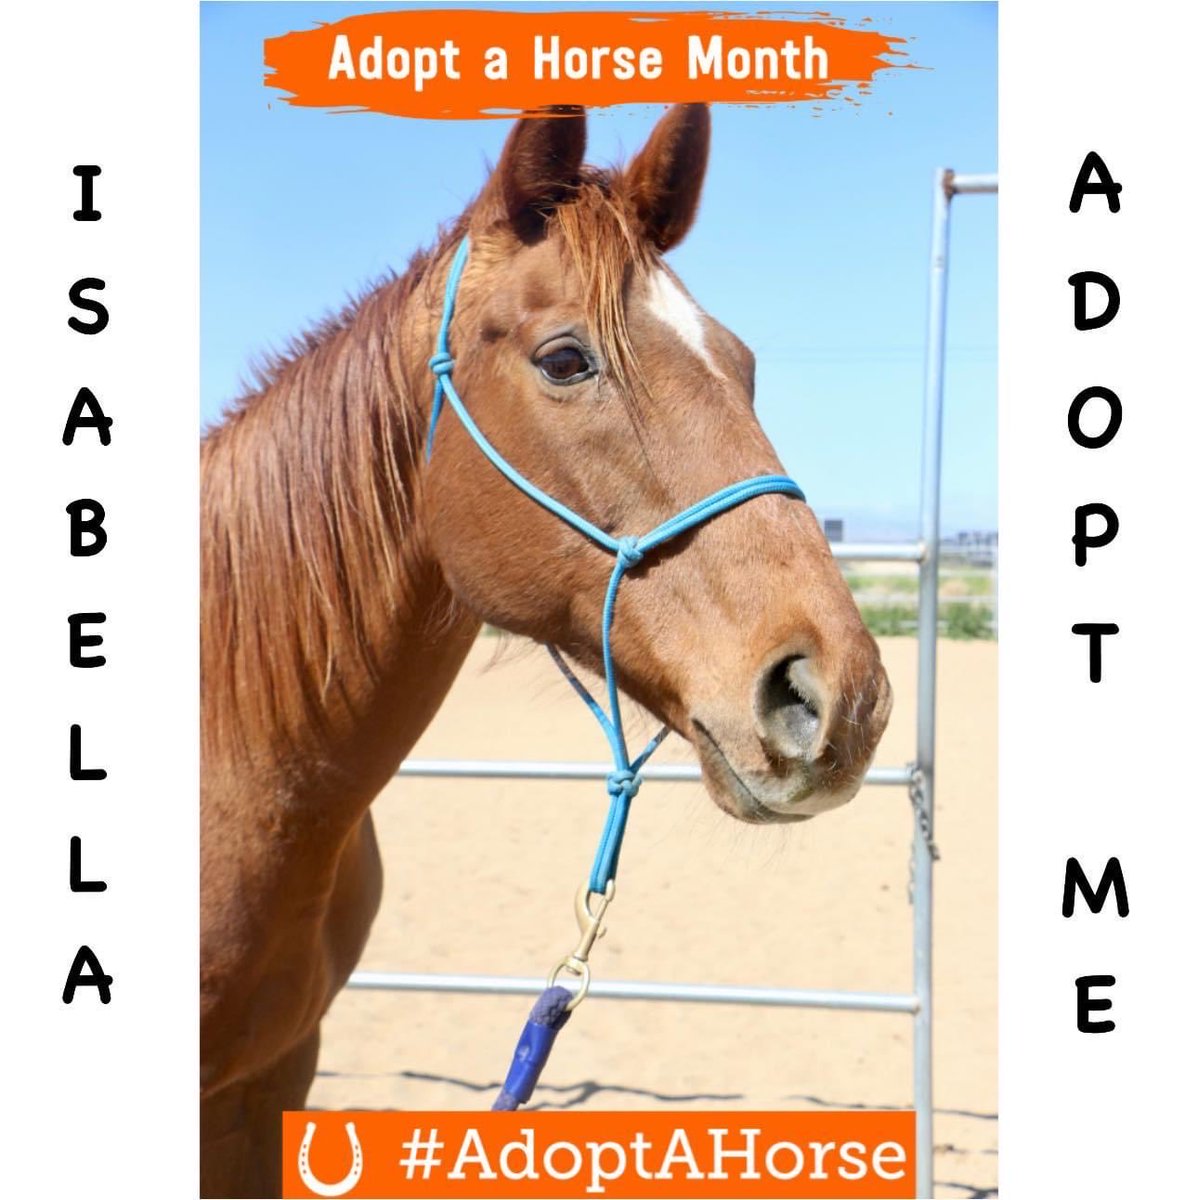 I know #AdoptAHorse month is over but…I had to share my pretty pal Isabella! She came all the way from #KY & she’s ready for her person! #adopt #love #ottb #thoroughbred #wildatheart #righthorse ⁦@ASPCA⁩ 🐴❤️